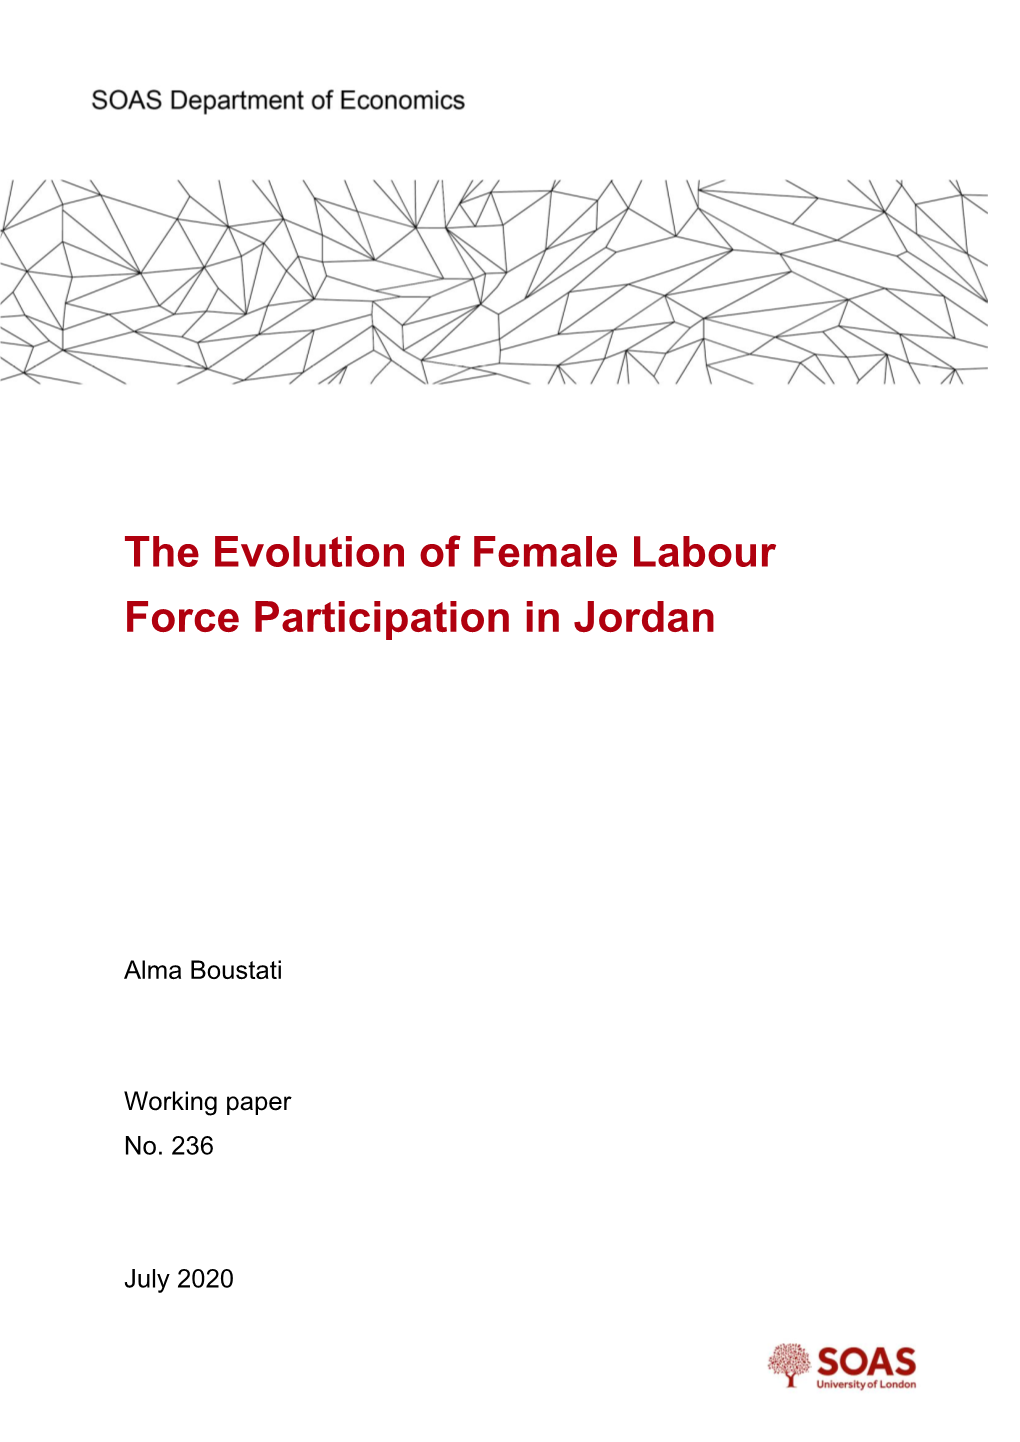 The Evolution of Female Labour Force Participation in Jordan